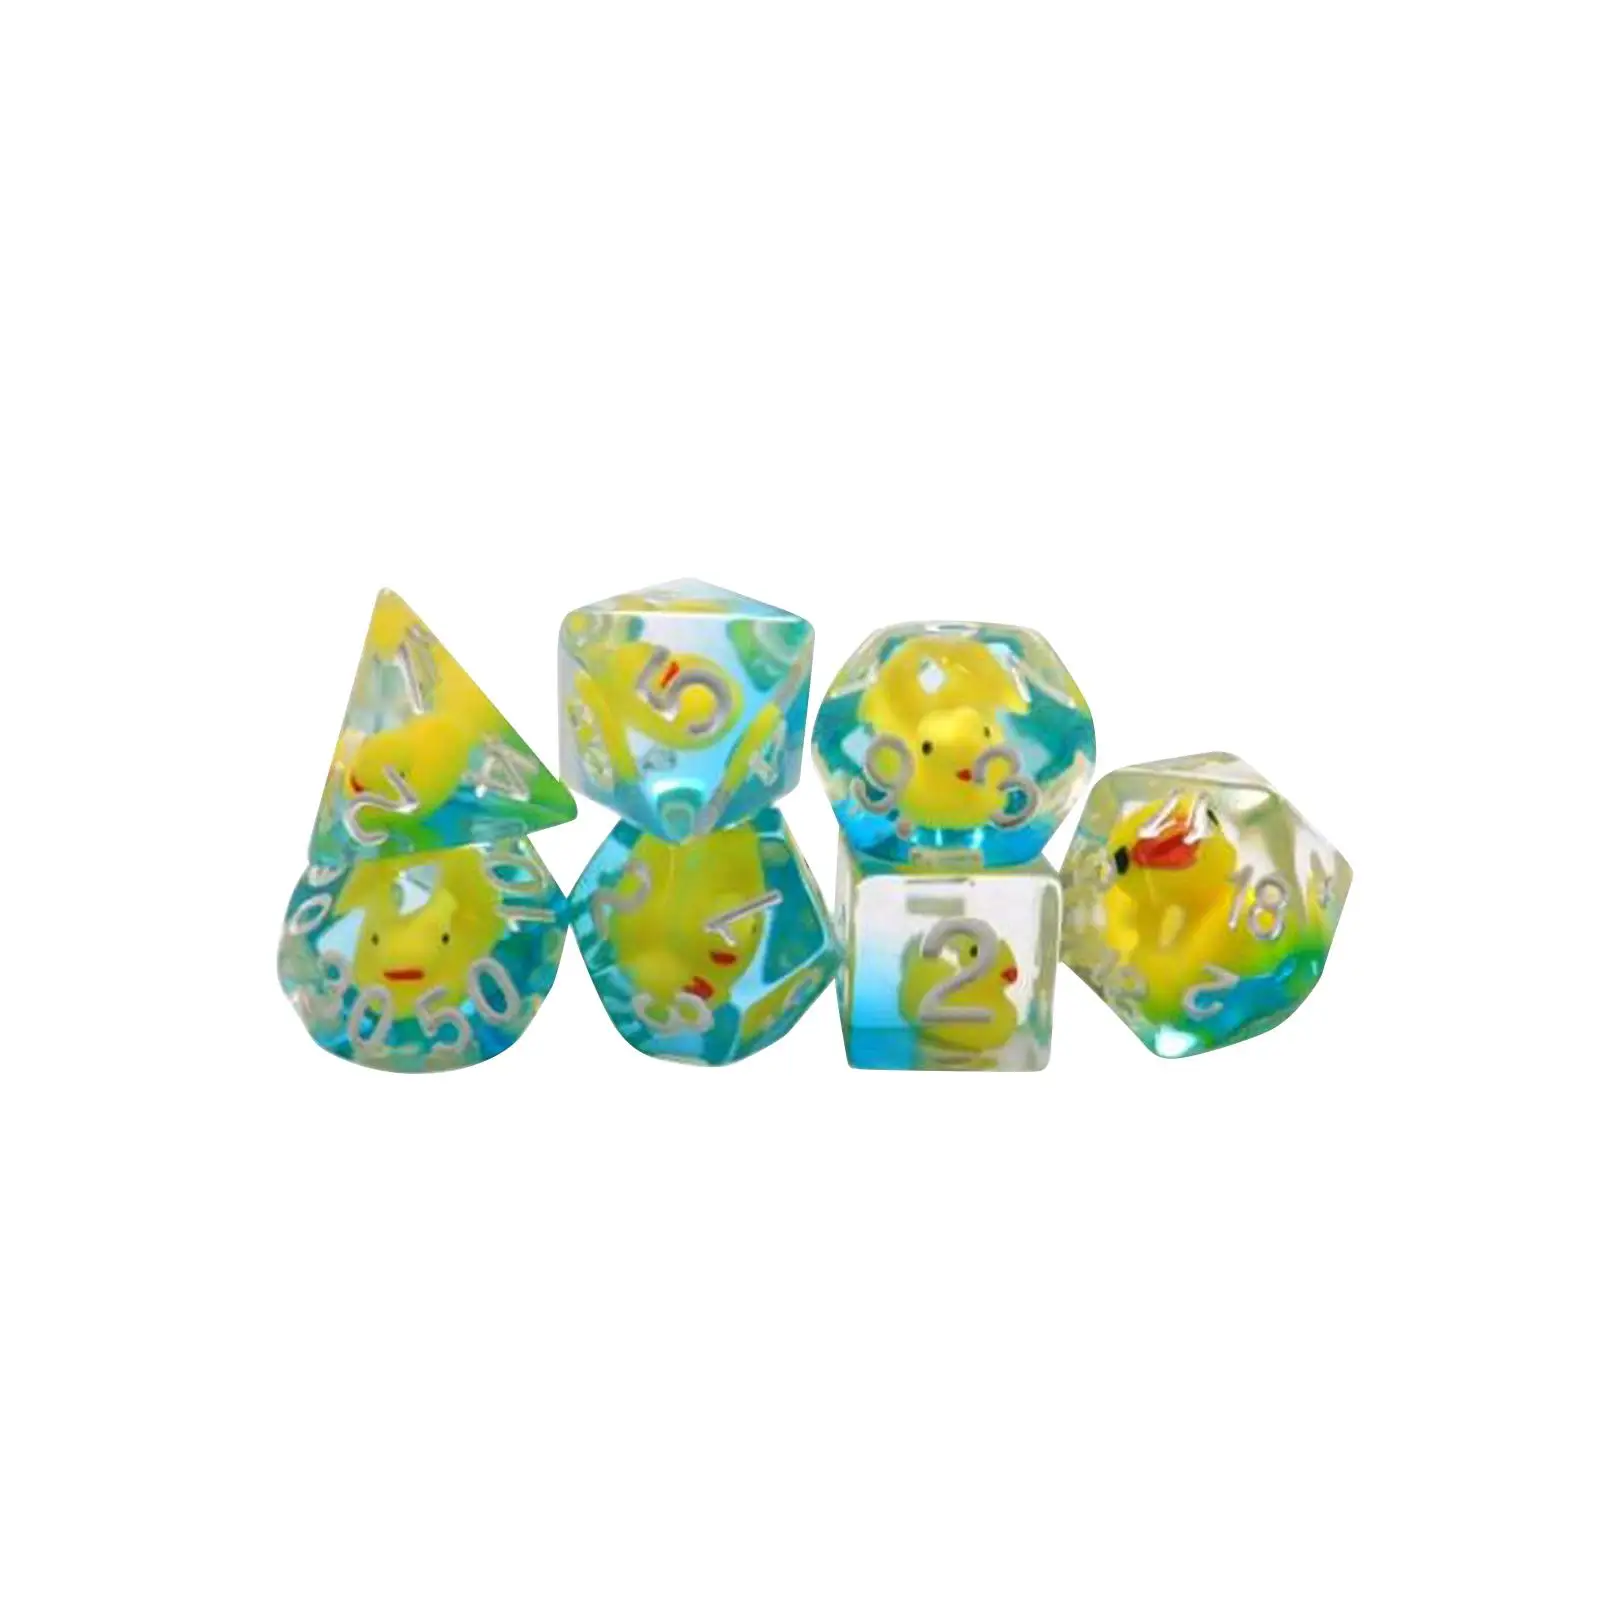 7x Resin Dices Filled with Ducks Party Supplies Entertainment Toys Polyhedral Dices Set for Bar KTV Card Games Board Game